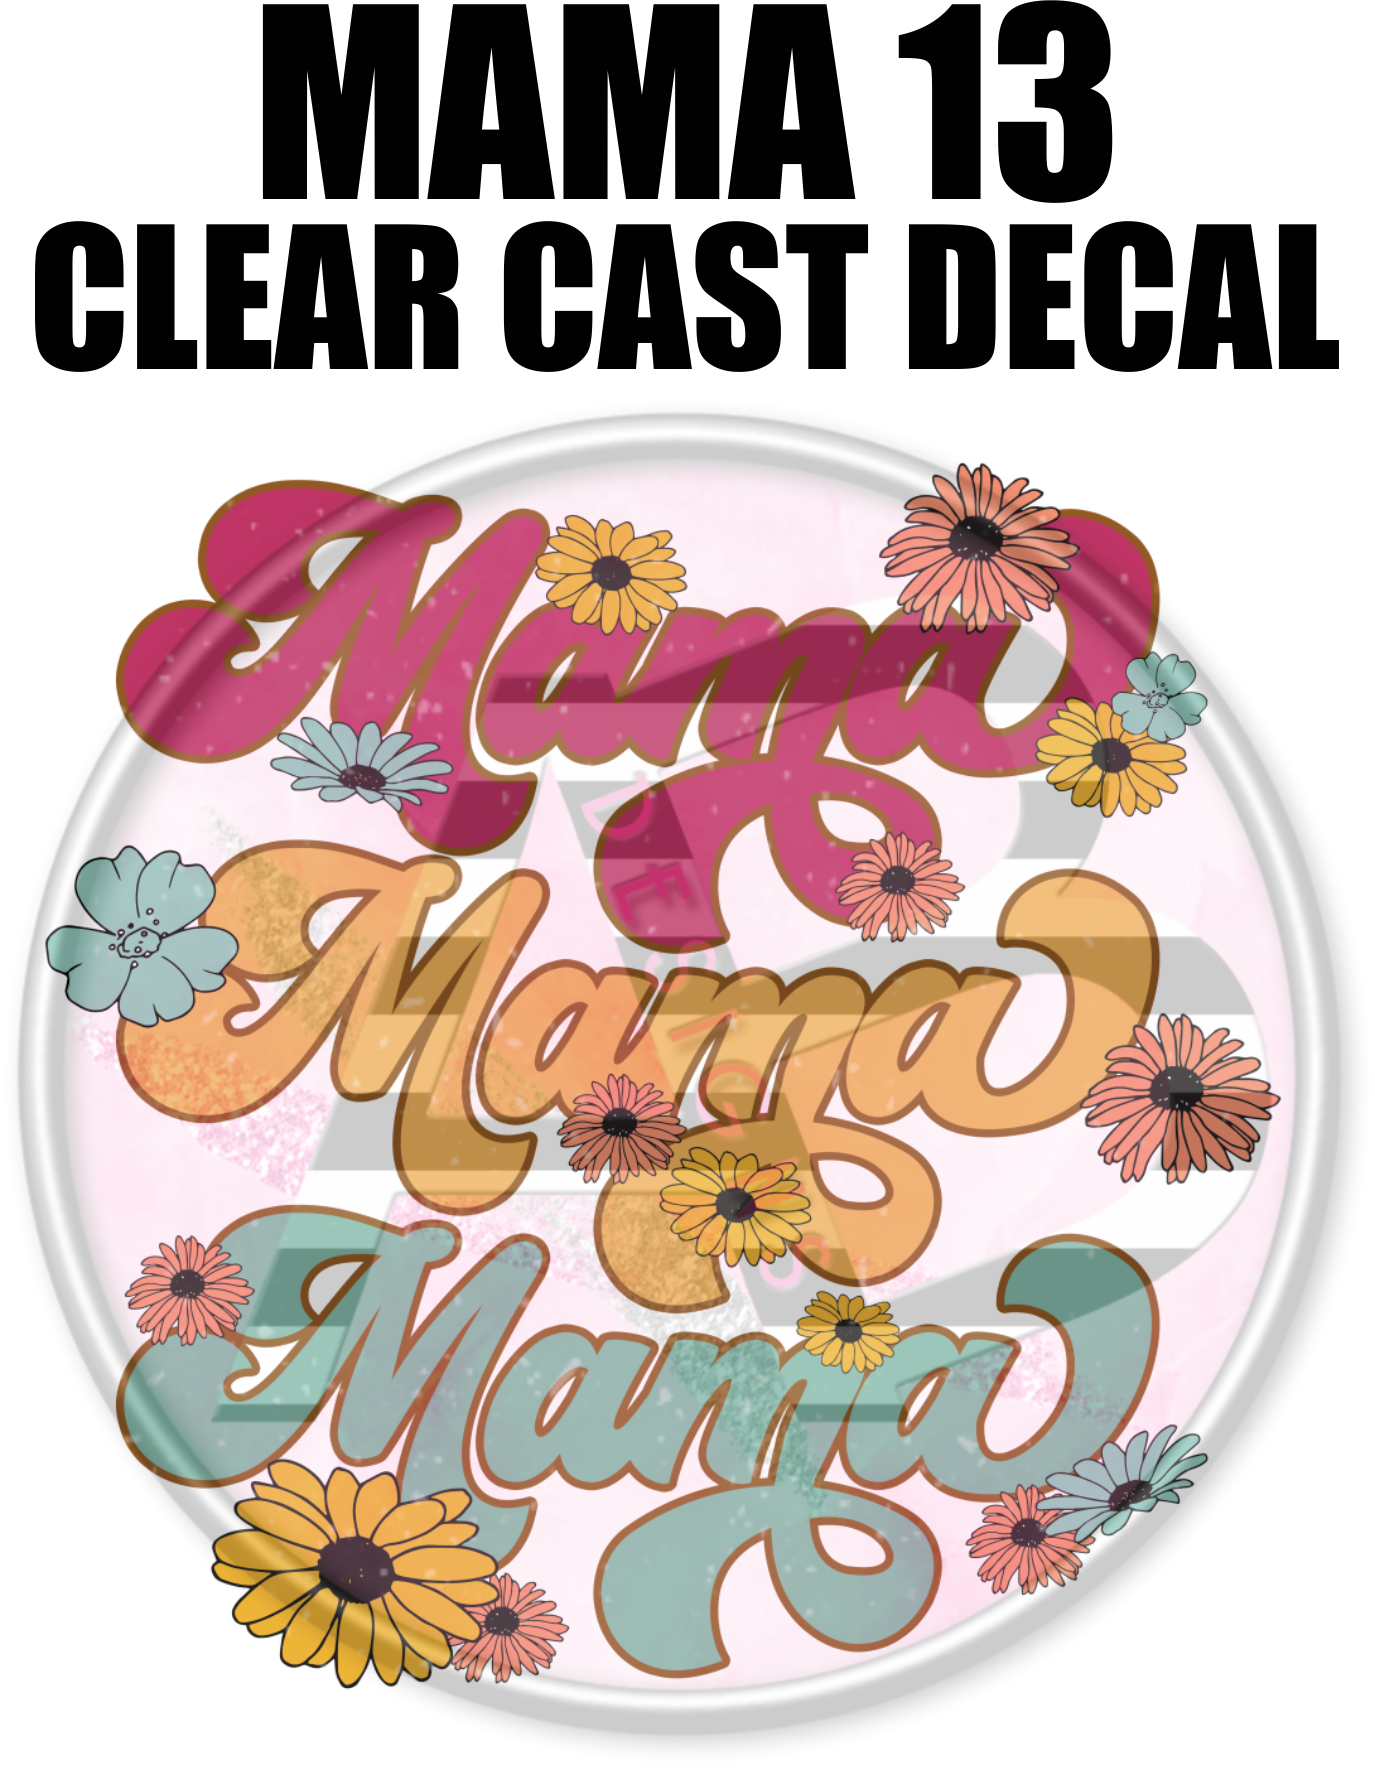 Mama 13 - Clear Cast Decal-538